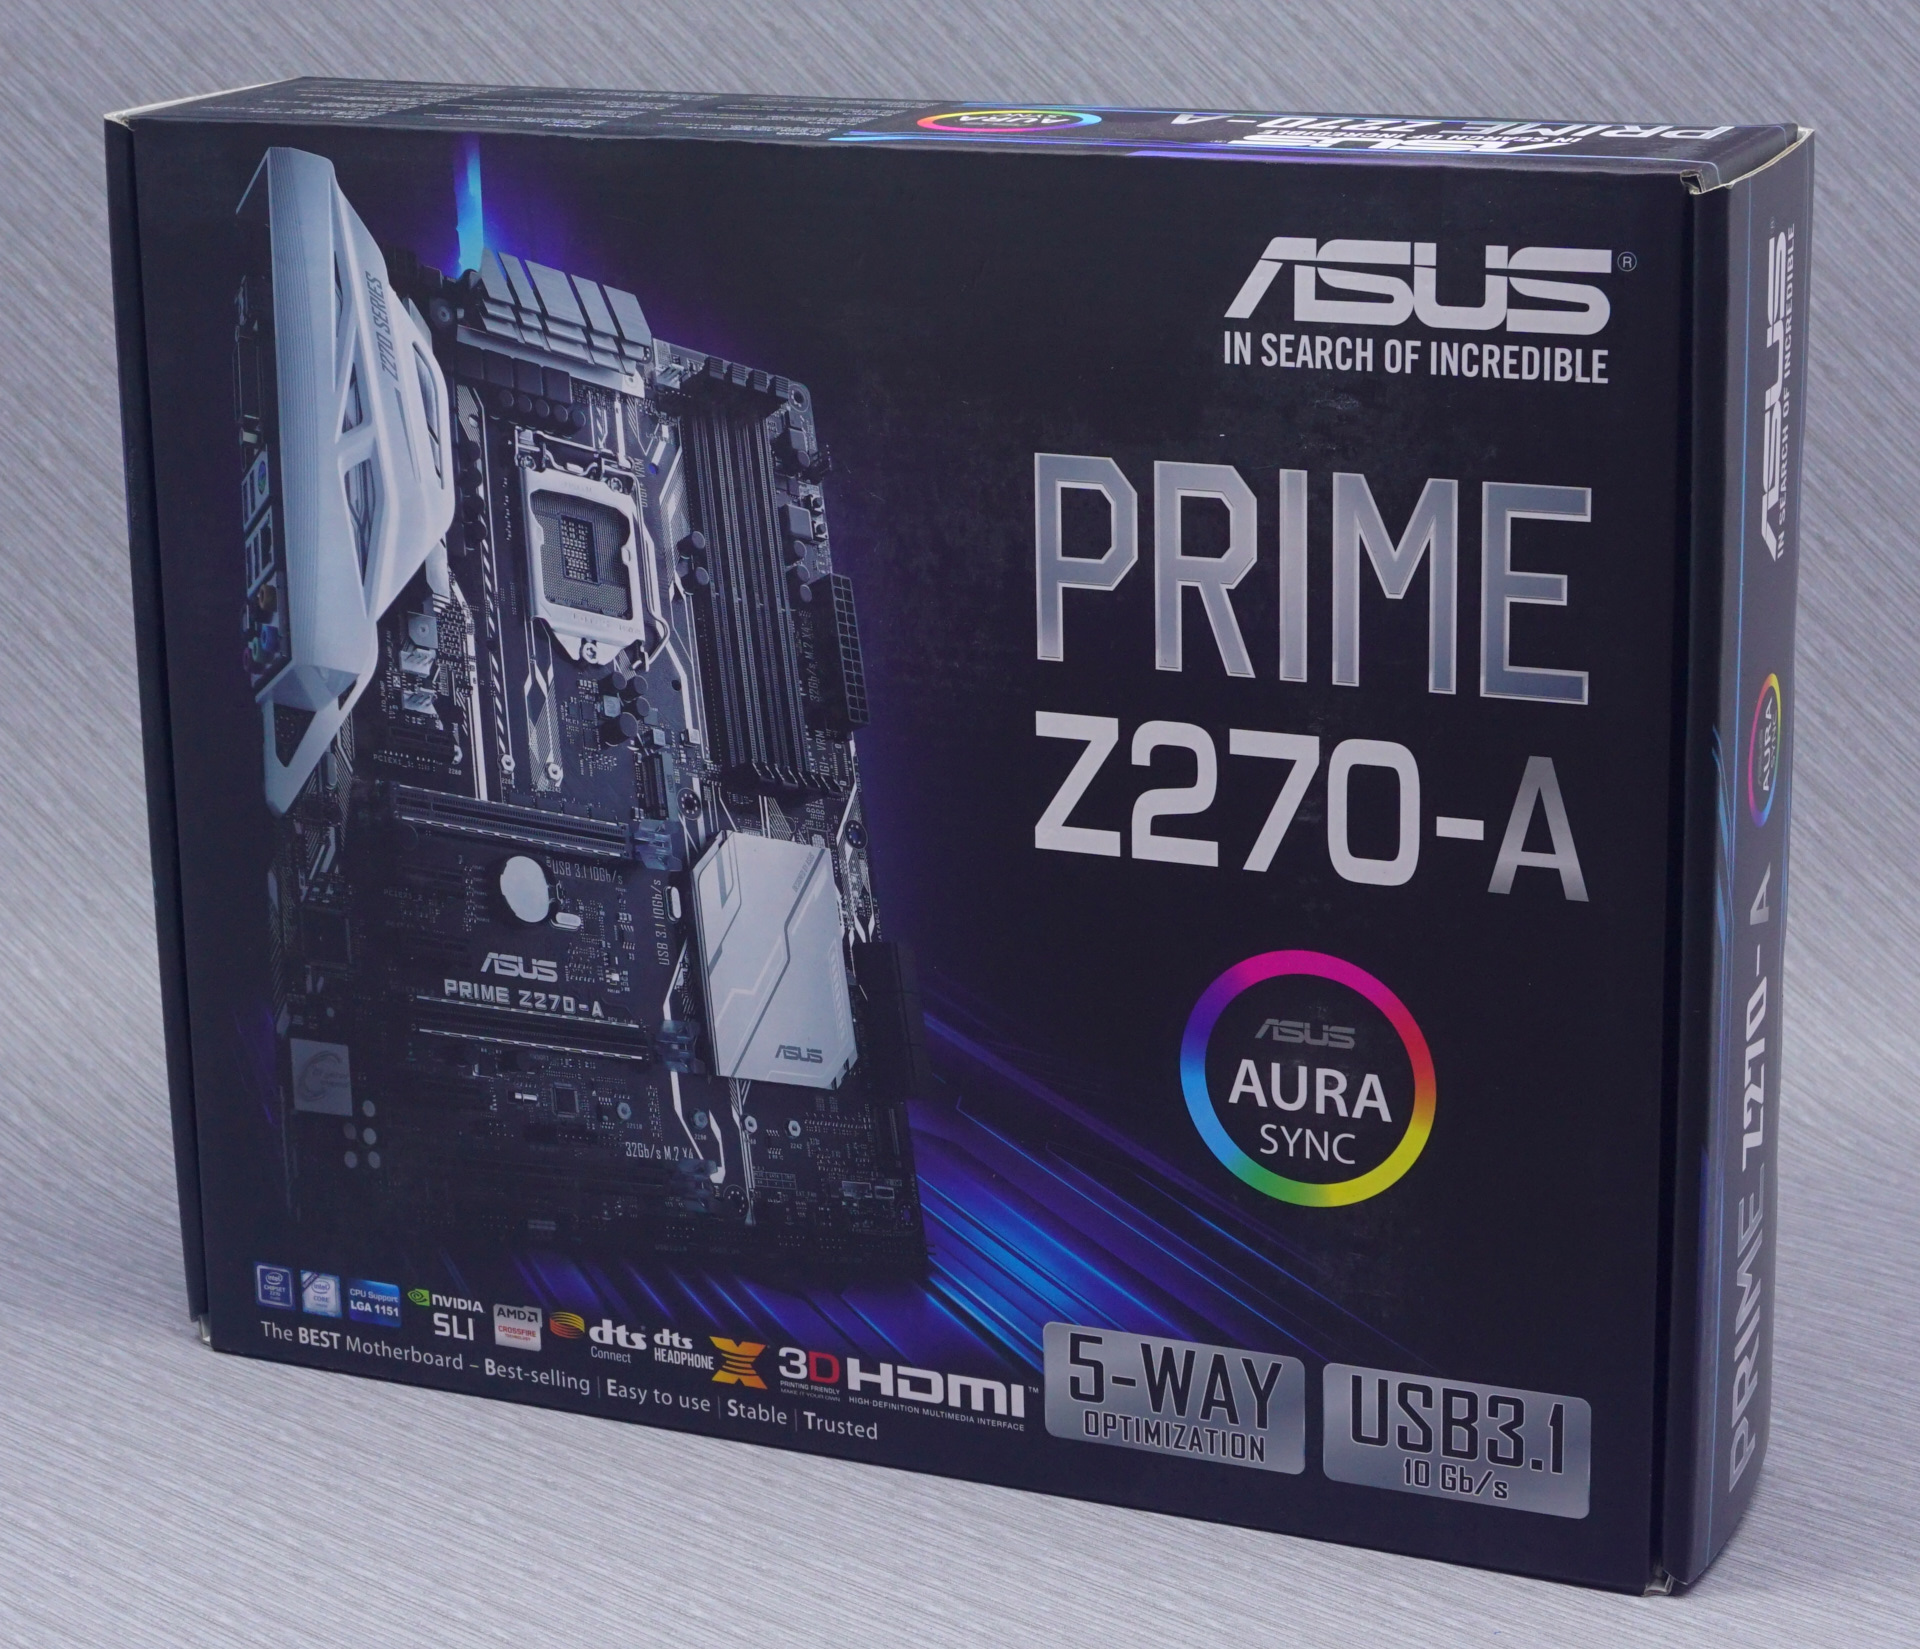 Asus Prime Z270-A Board Features, Visual Inspection - The Asus